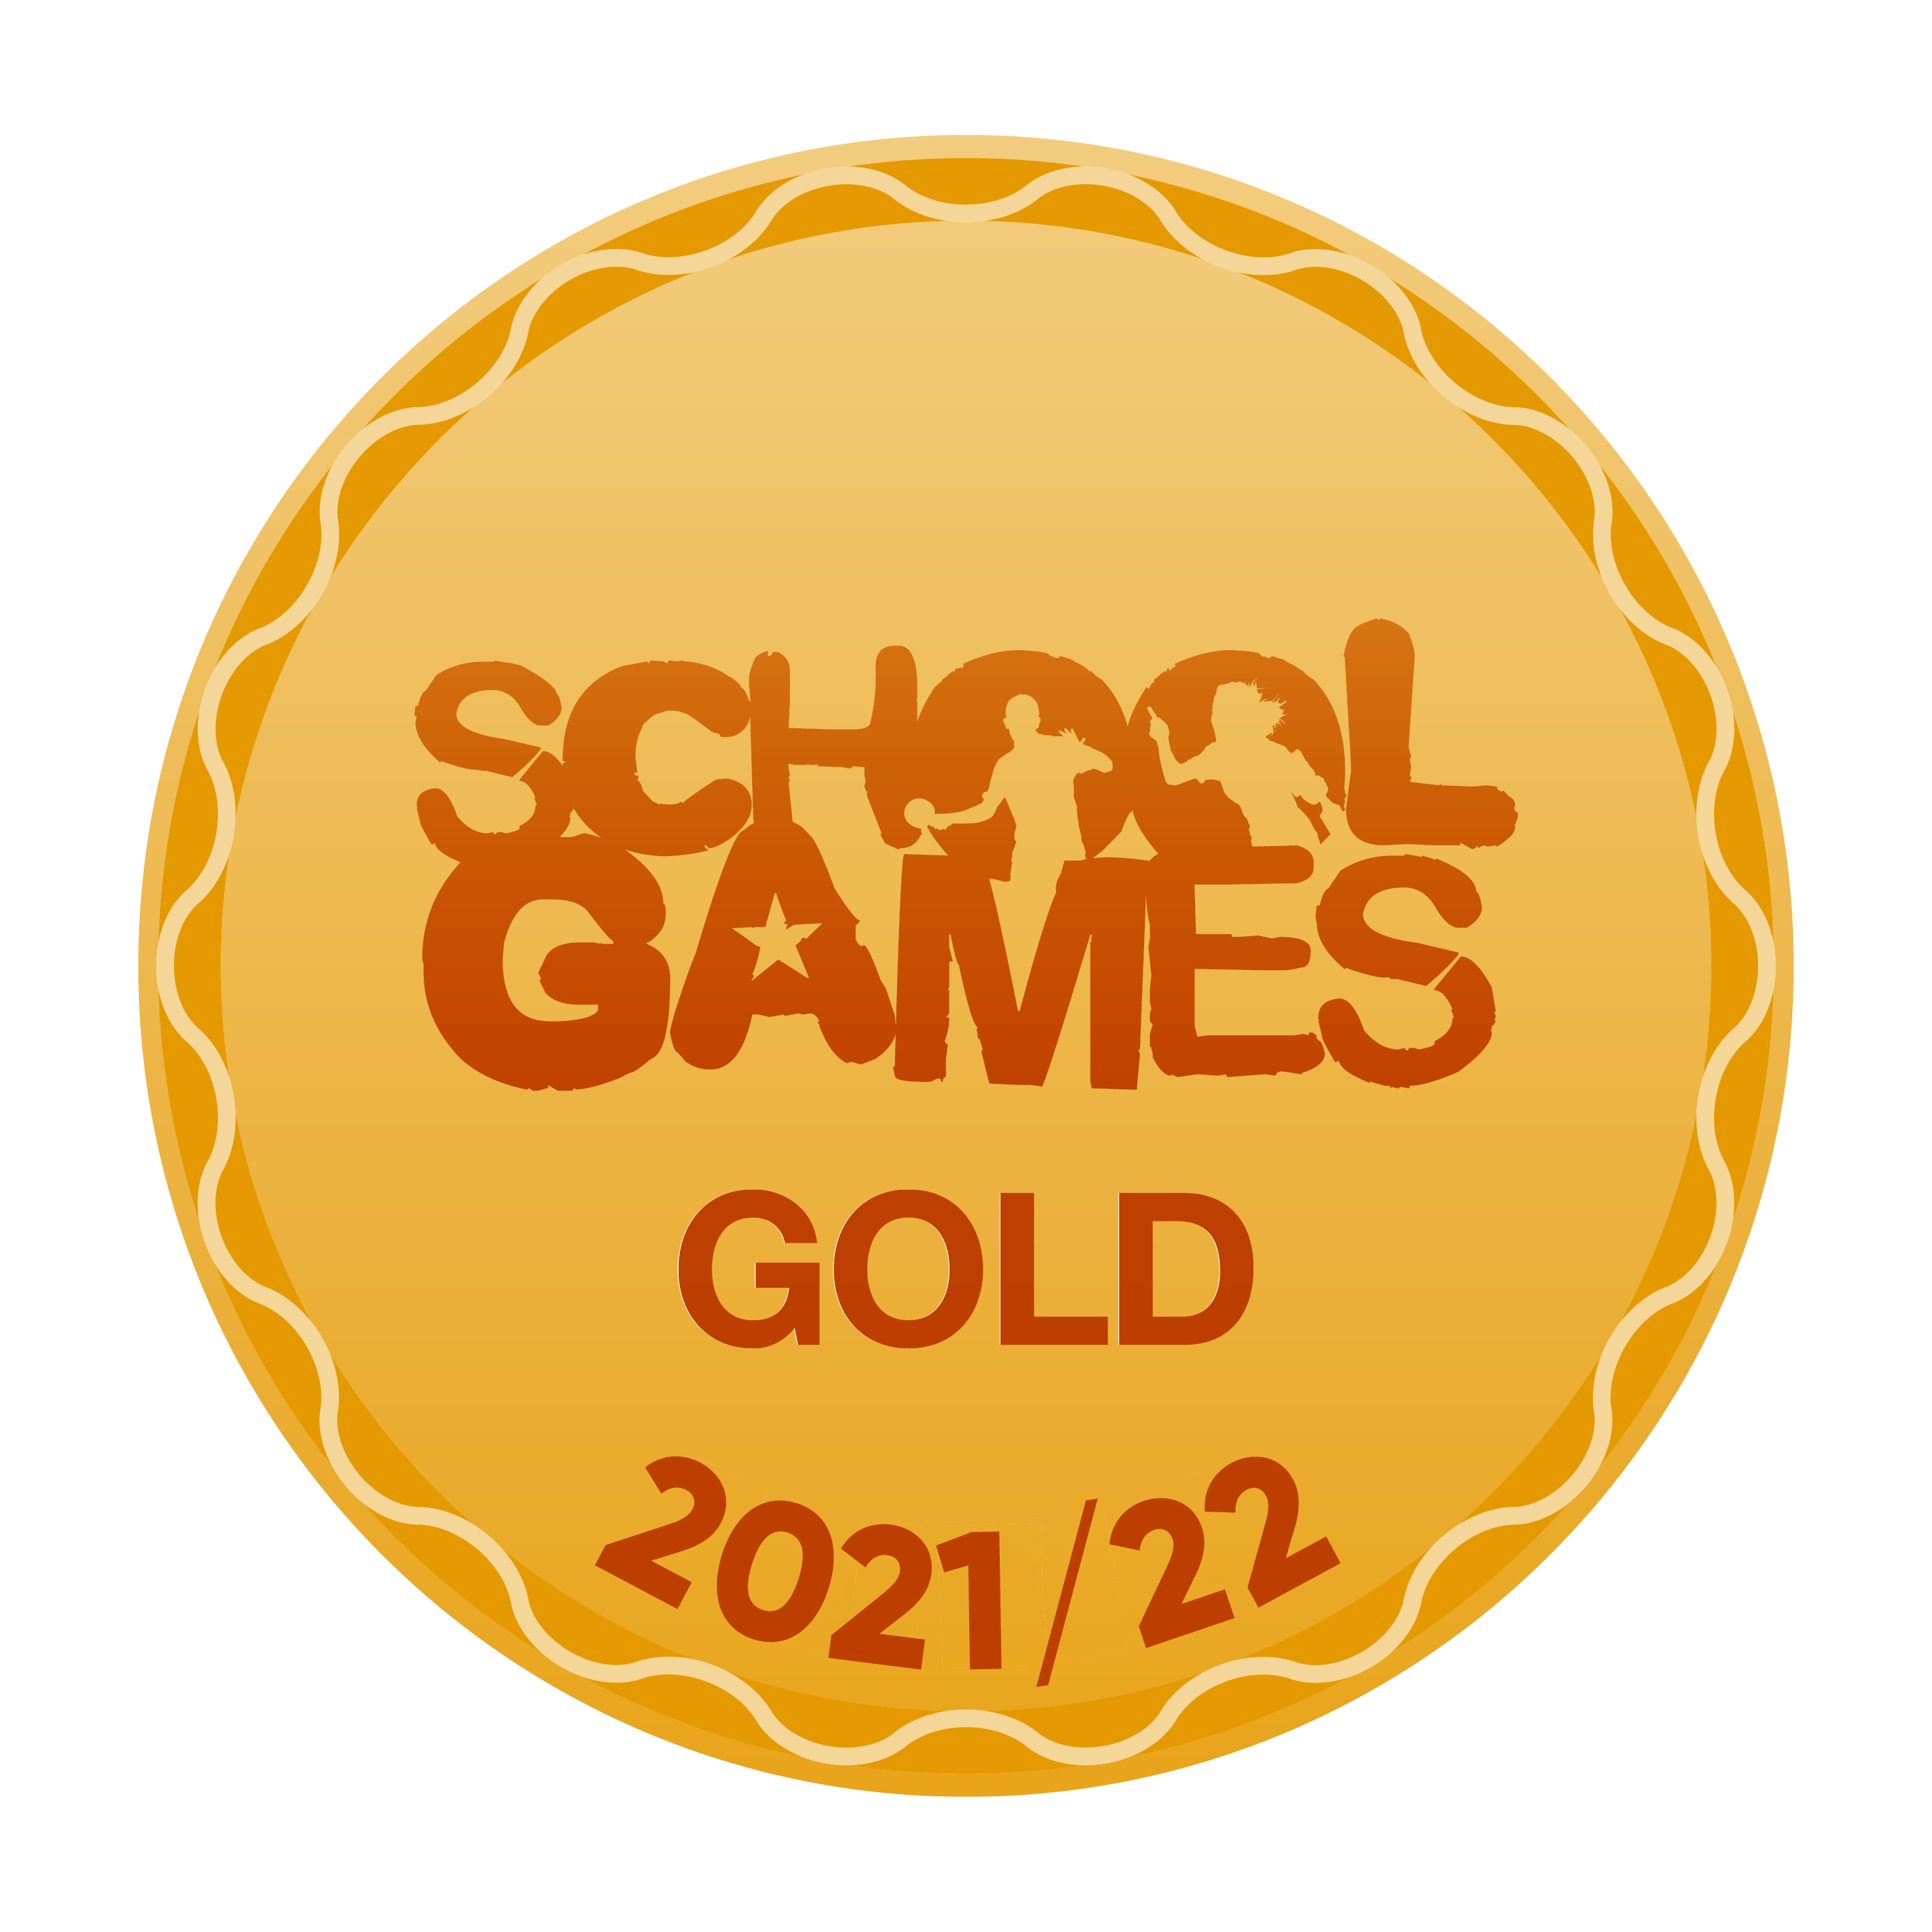 Oakfield High School and College on Twitter: "We are delighted to announce  that we have achieved the School Gold Mark Award for 2021/22. We are  extremely proud of our learners for their